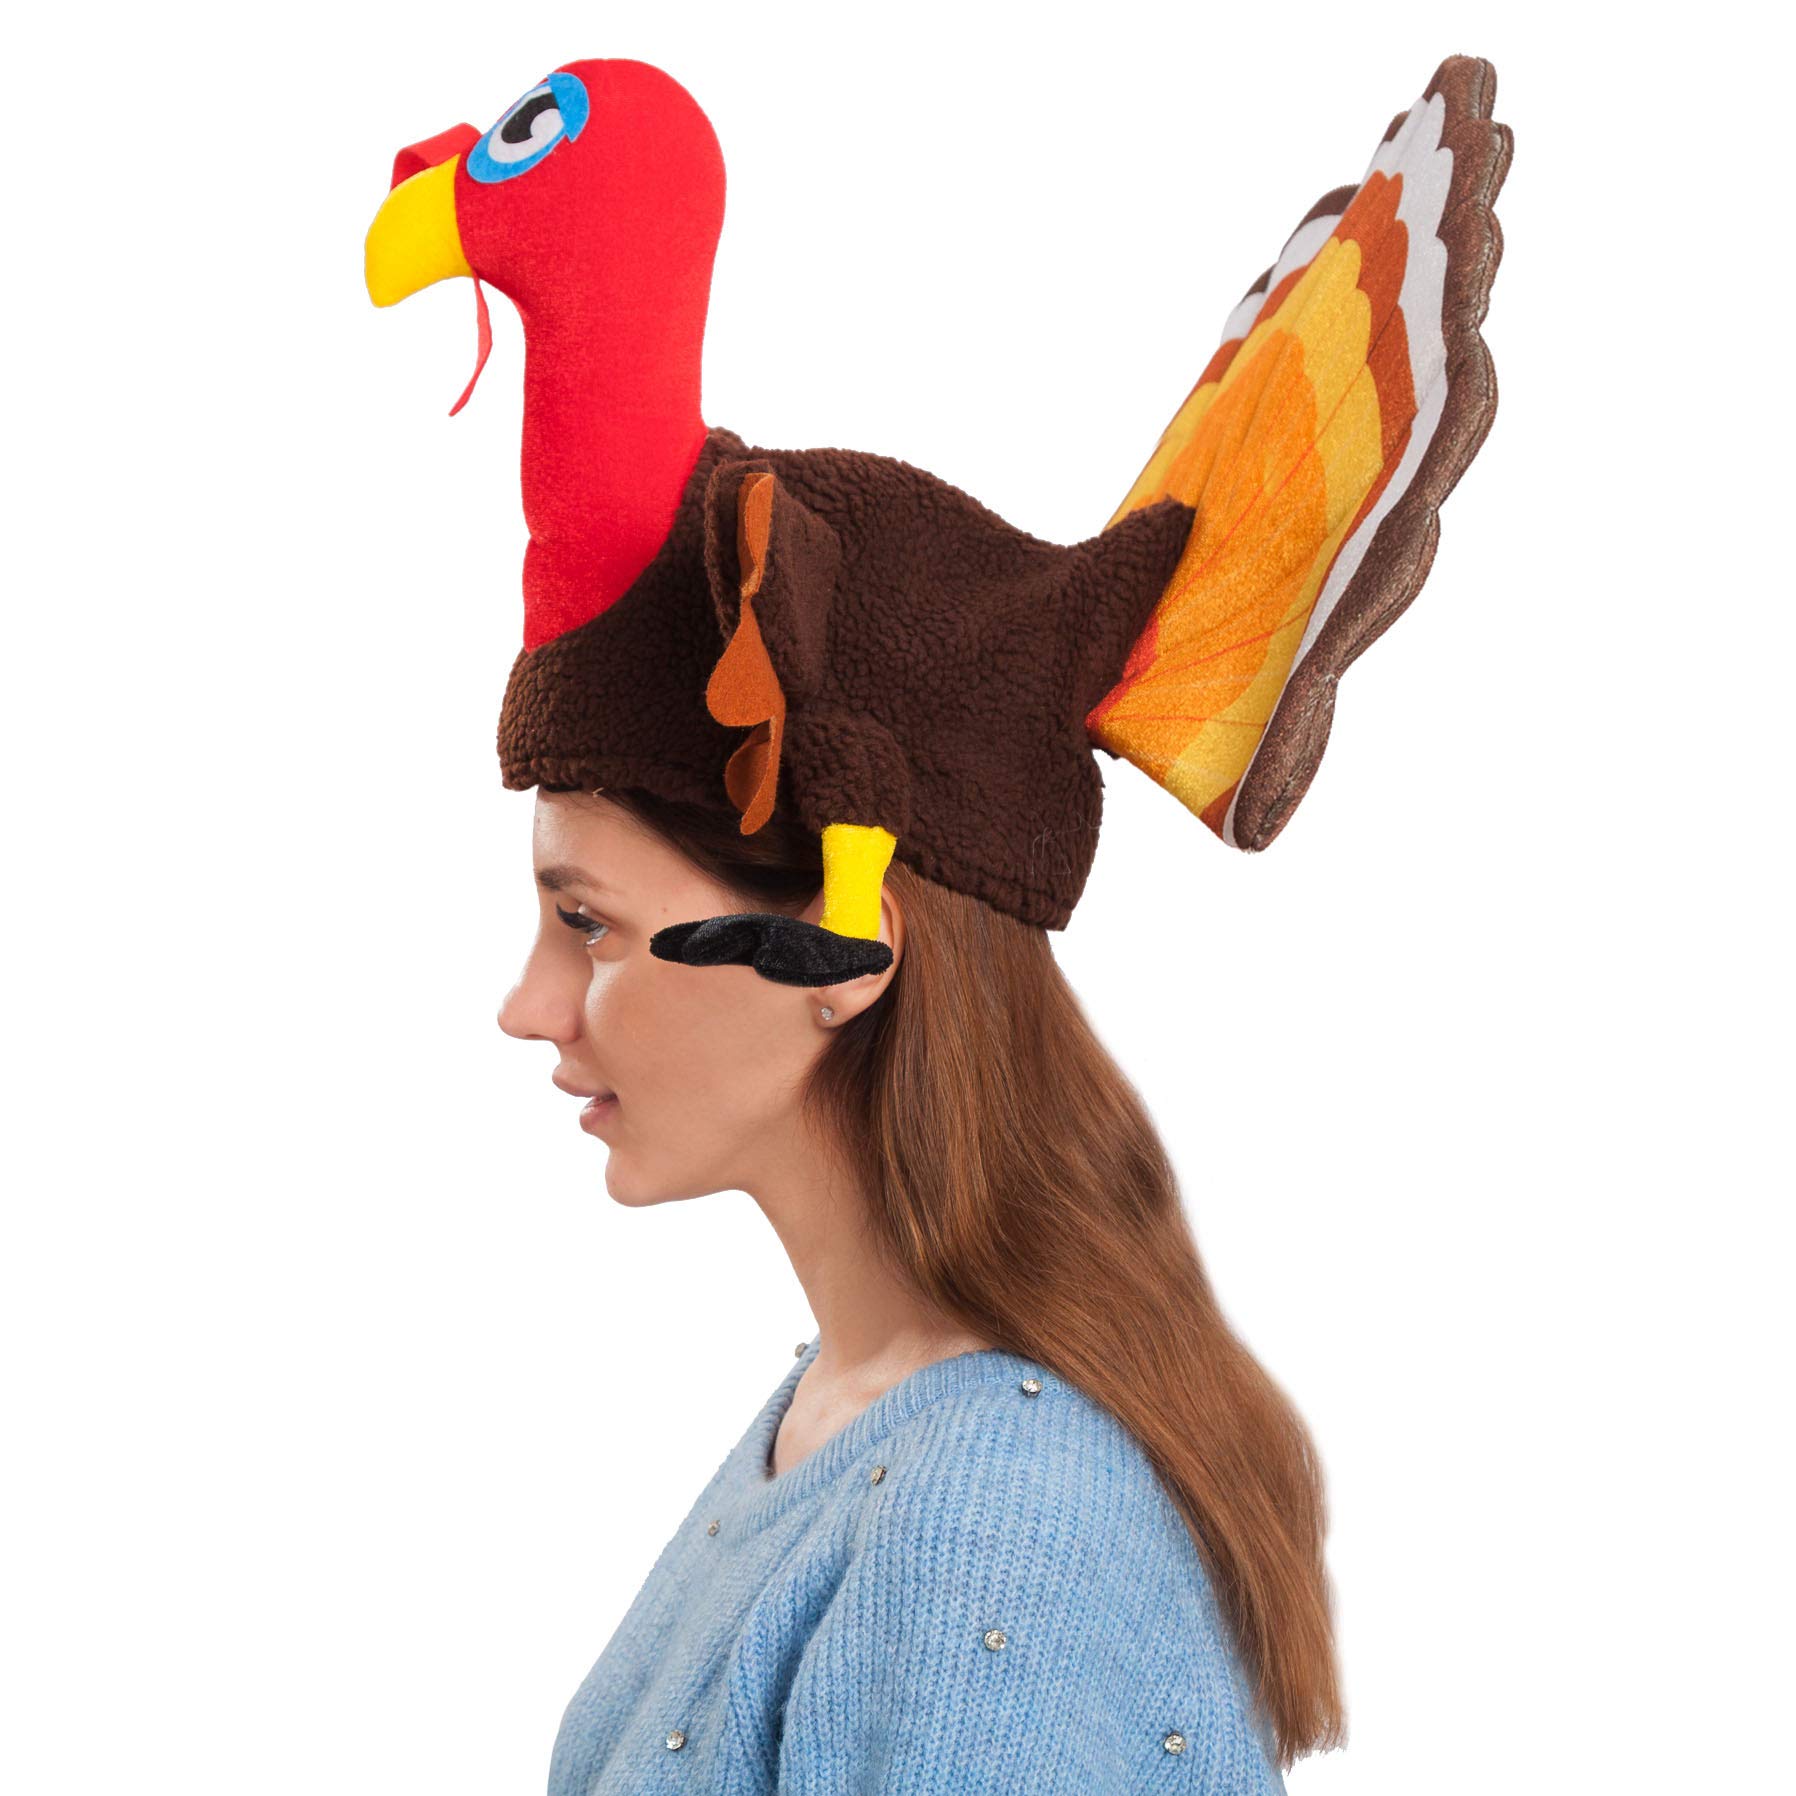 Spooktacular 2 Pack Thanksgiving Turkey Hats Turkey Cap for Thanksgiving Night Event Dress-up Party Role Play Carnival Cosplay Costume Accessories Multi-colores - image 4 of 7